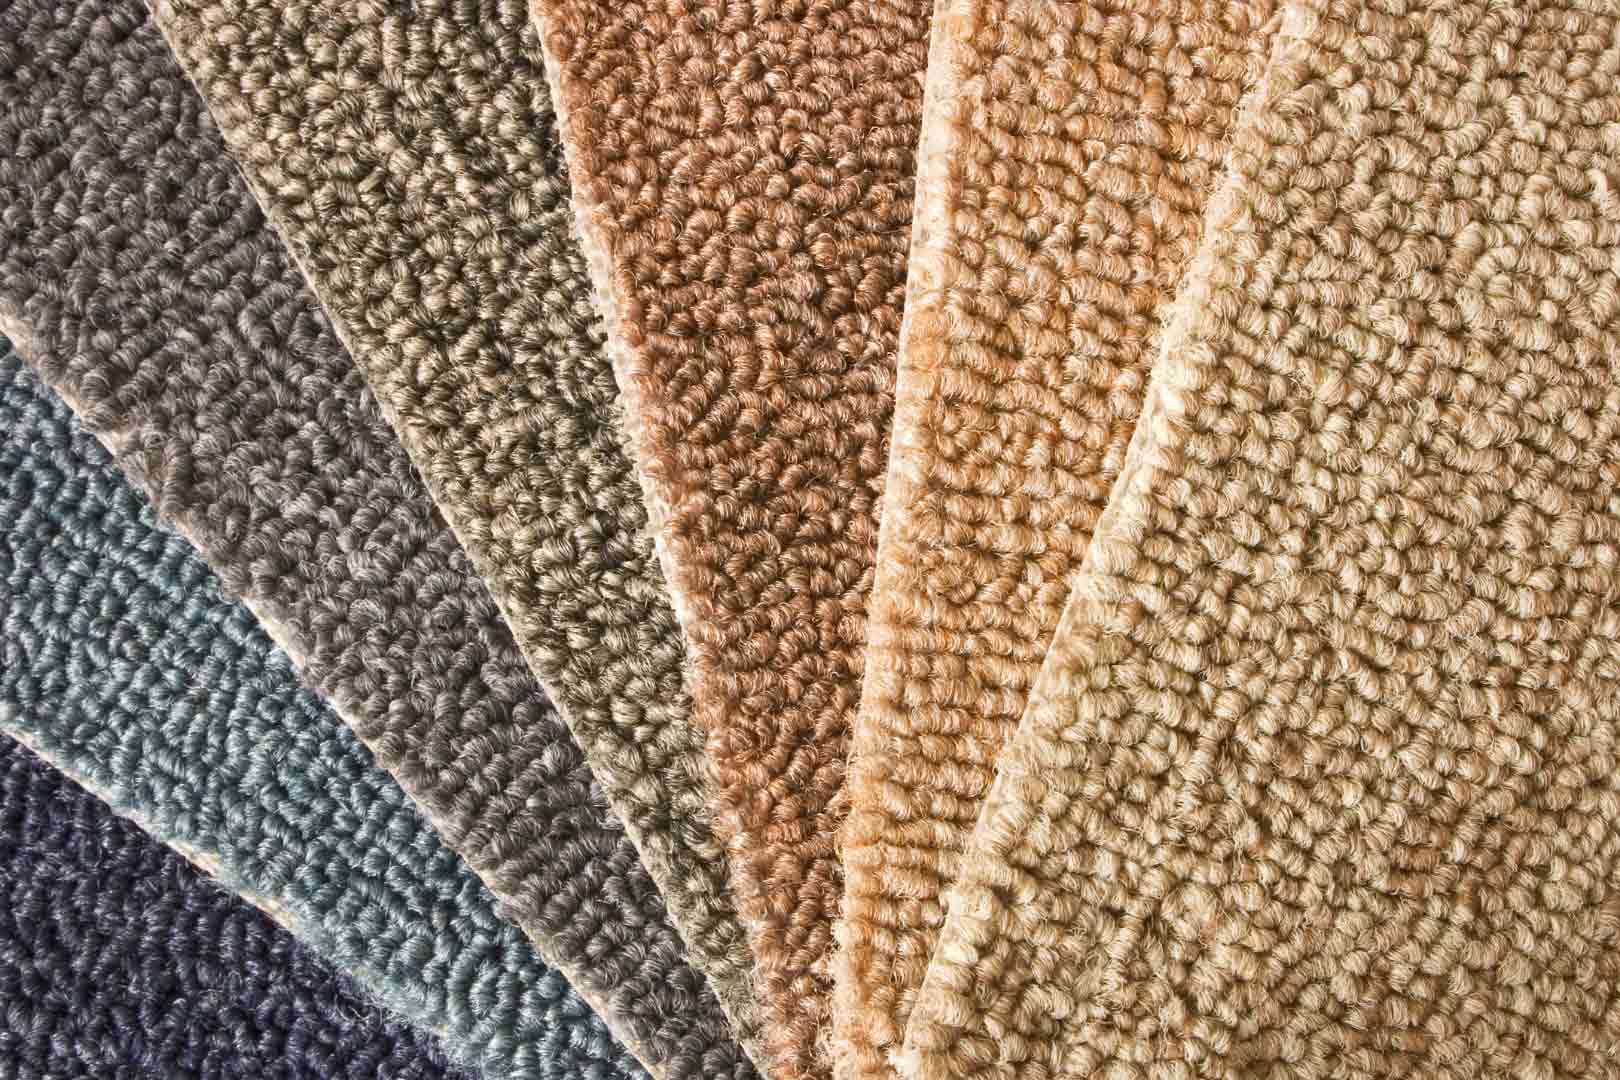 A variety of carpets in different colors for flooring needs.